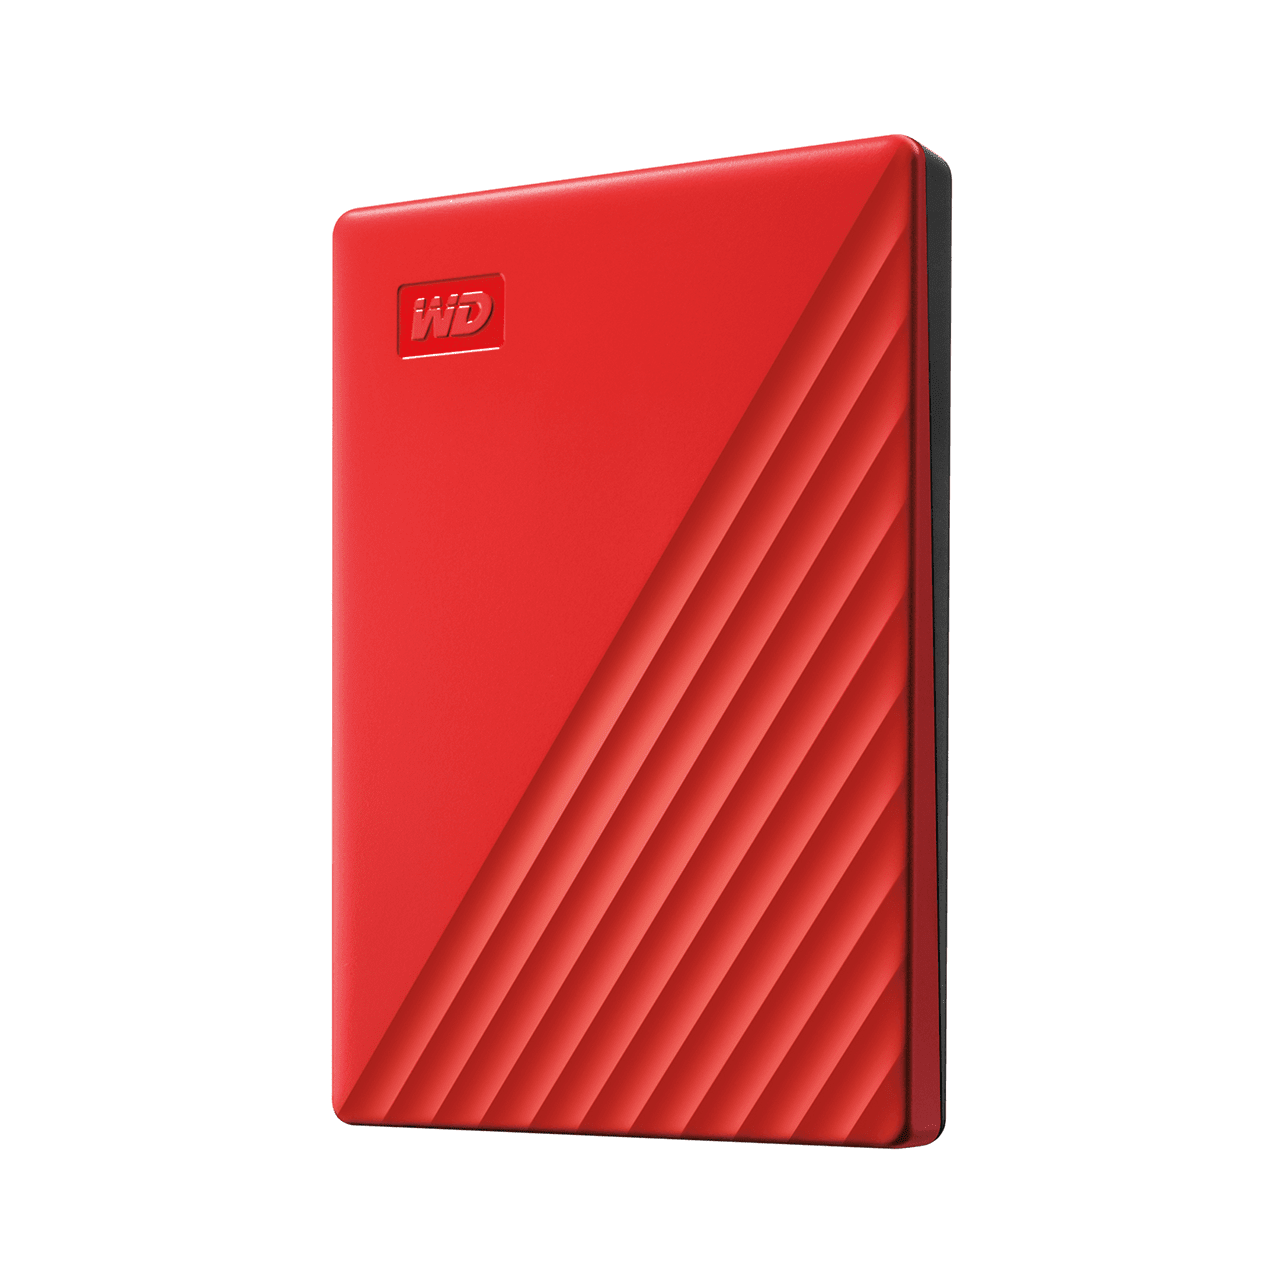 WD Western Digital My Passport  4TB ( RED ) Slim Portable External Hard Disk USB 3.0 With WD Backup Software & Password Protection